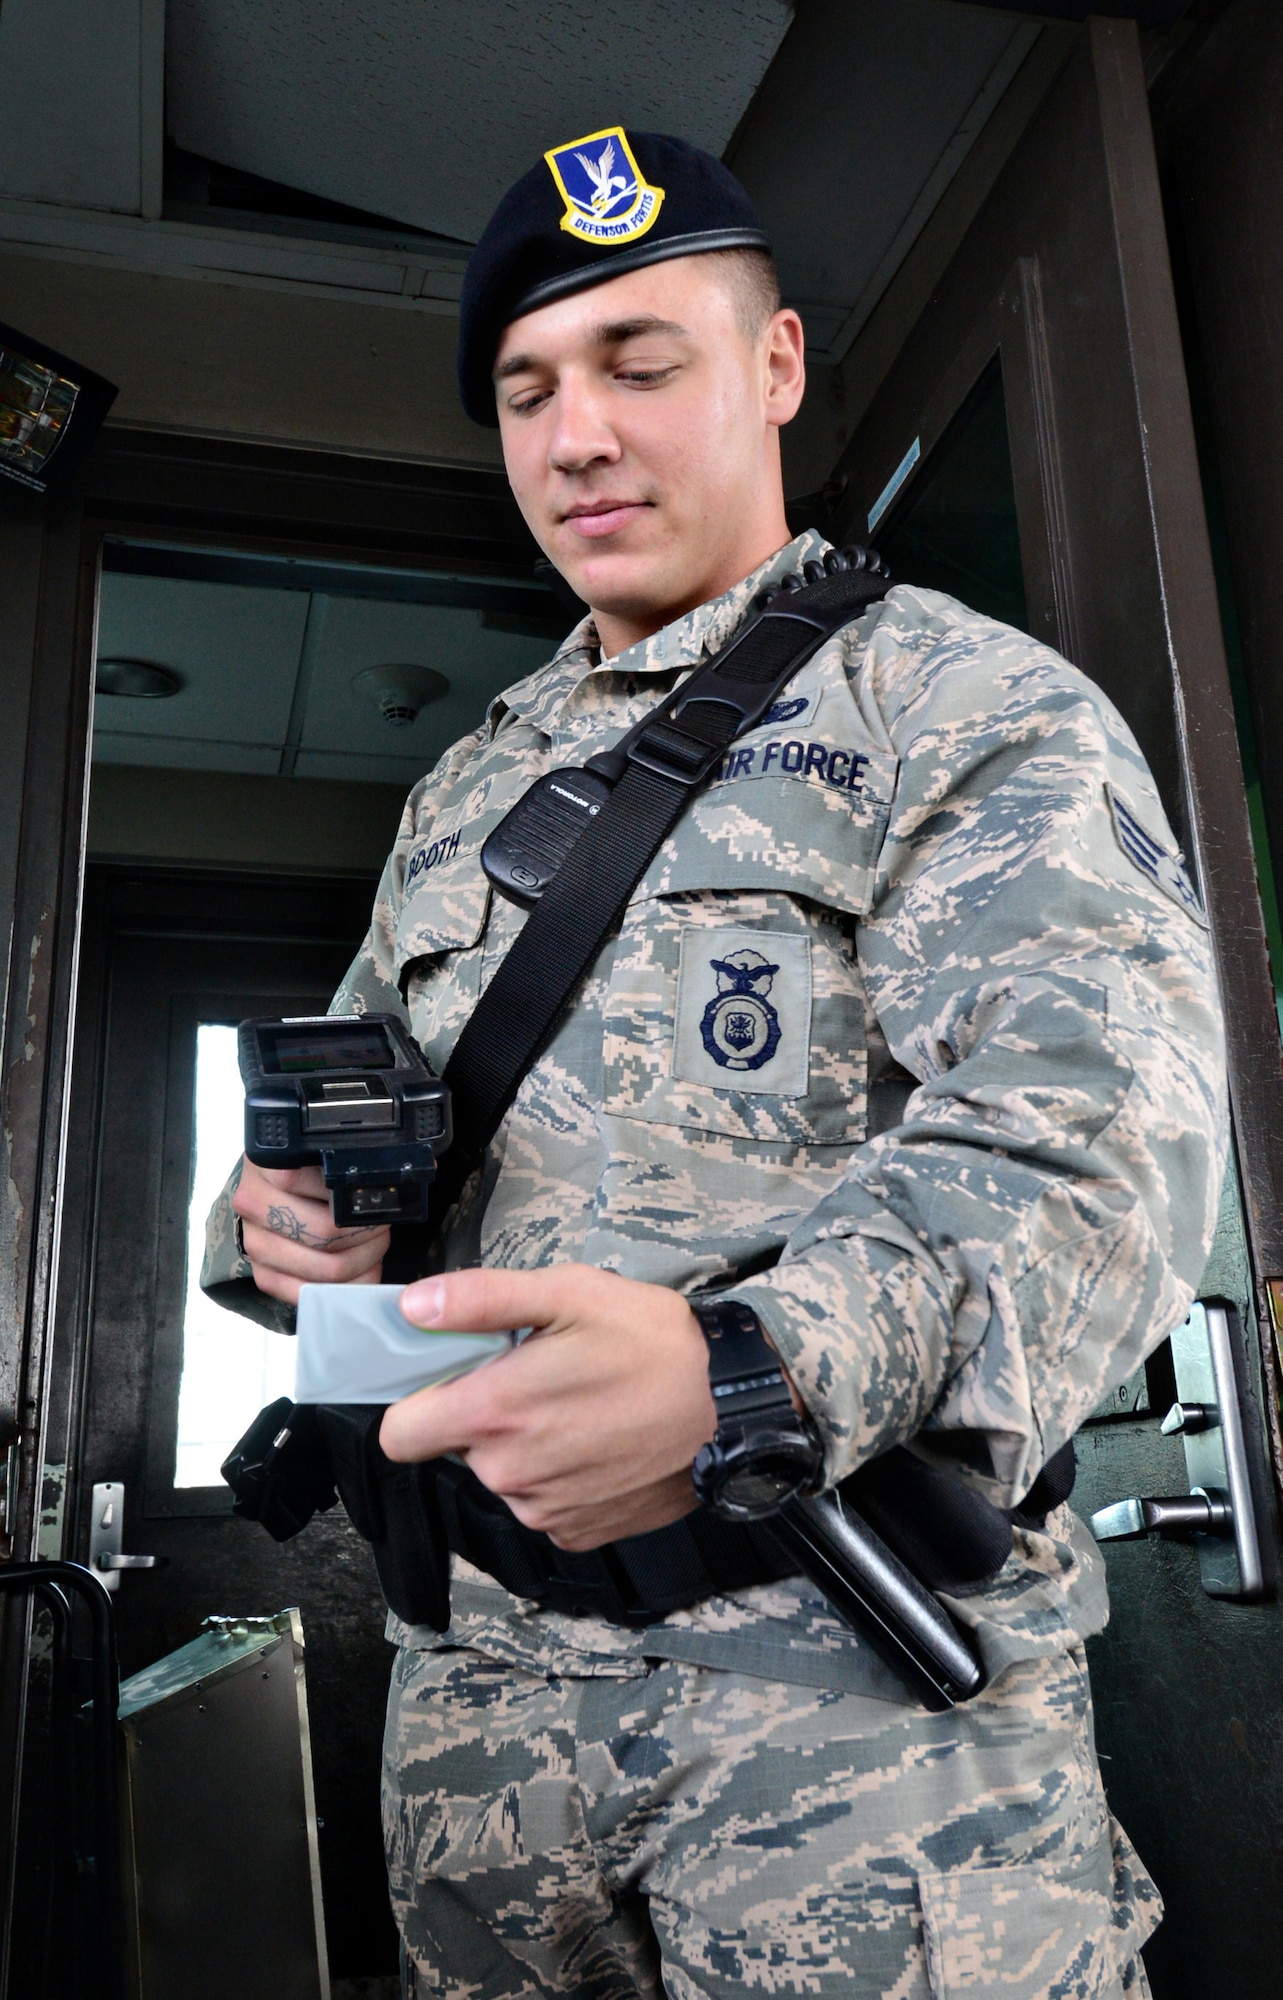 Senior Airman Blake Booth, with the 72nd Security Forces Squadron, uses the new Defense Biometrics Identification System while working at the Tinker Gate. (Air Force photo by Kelly White)